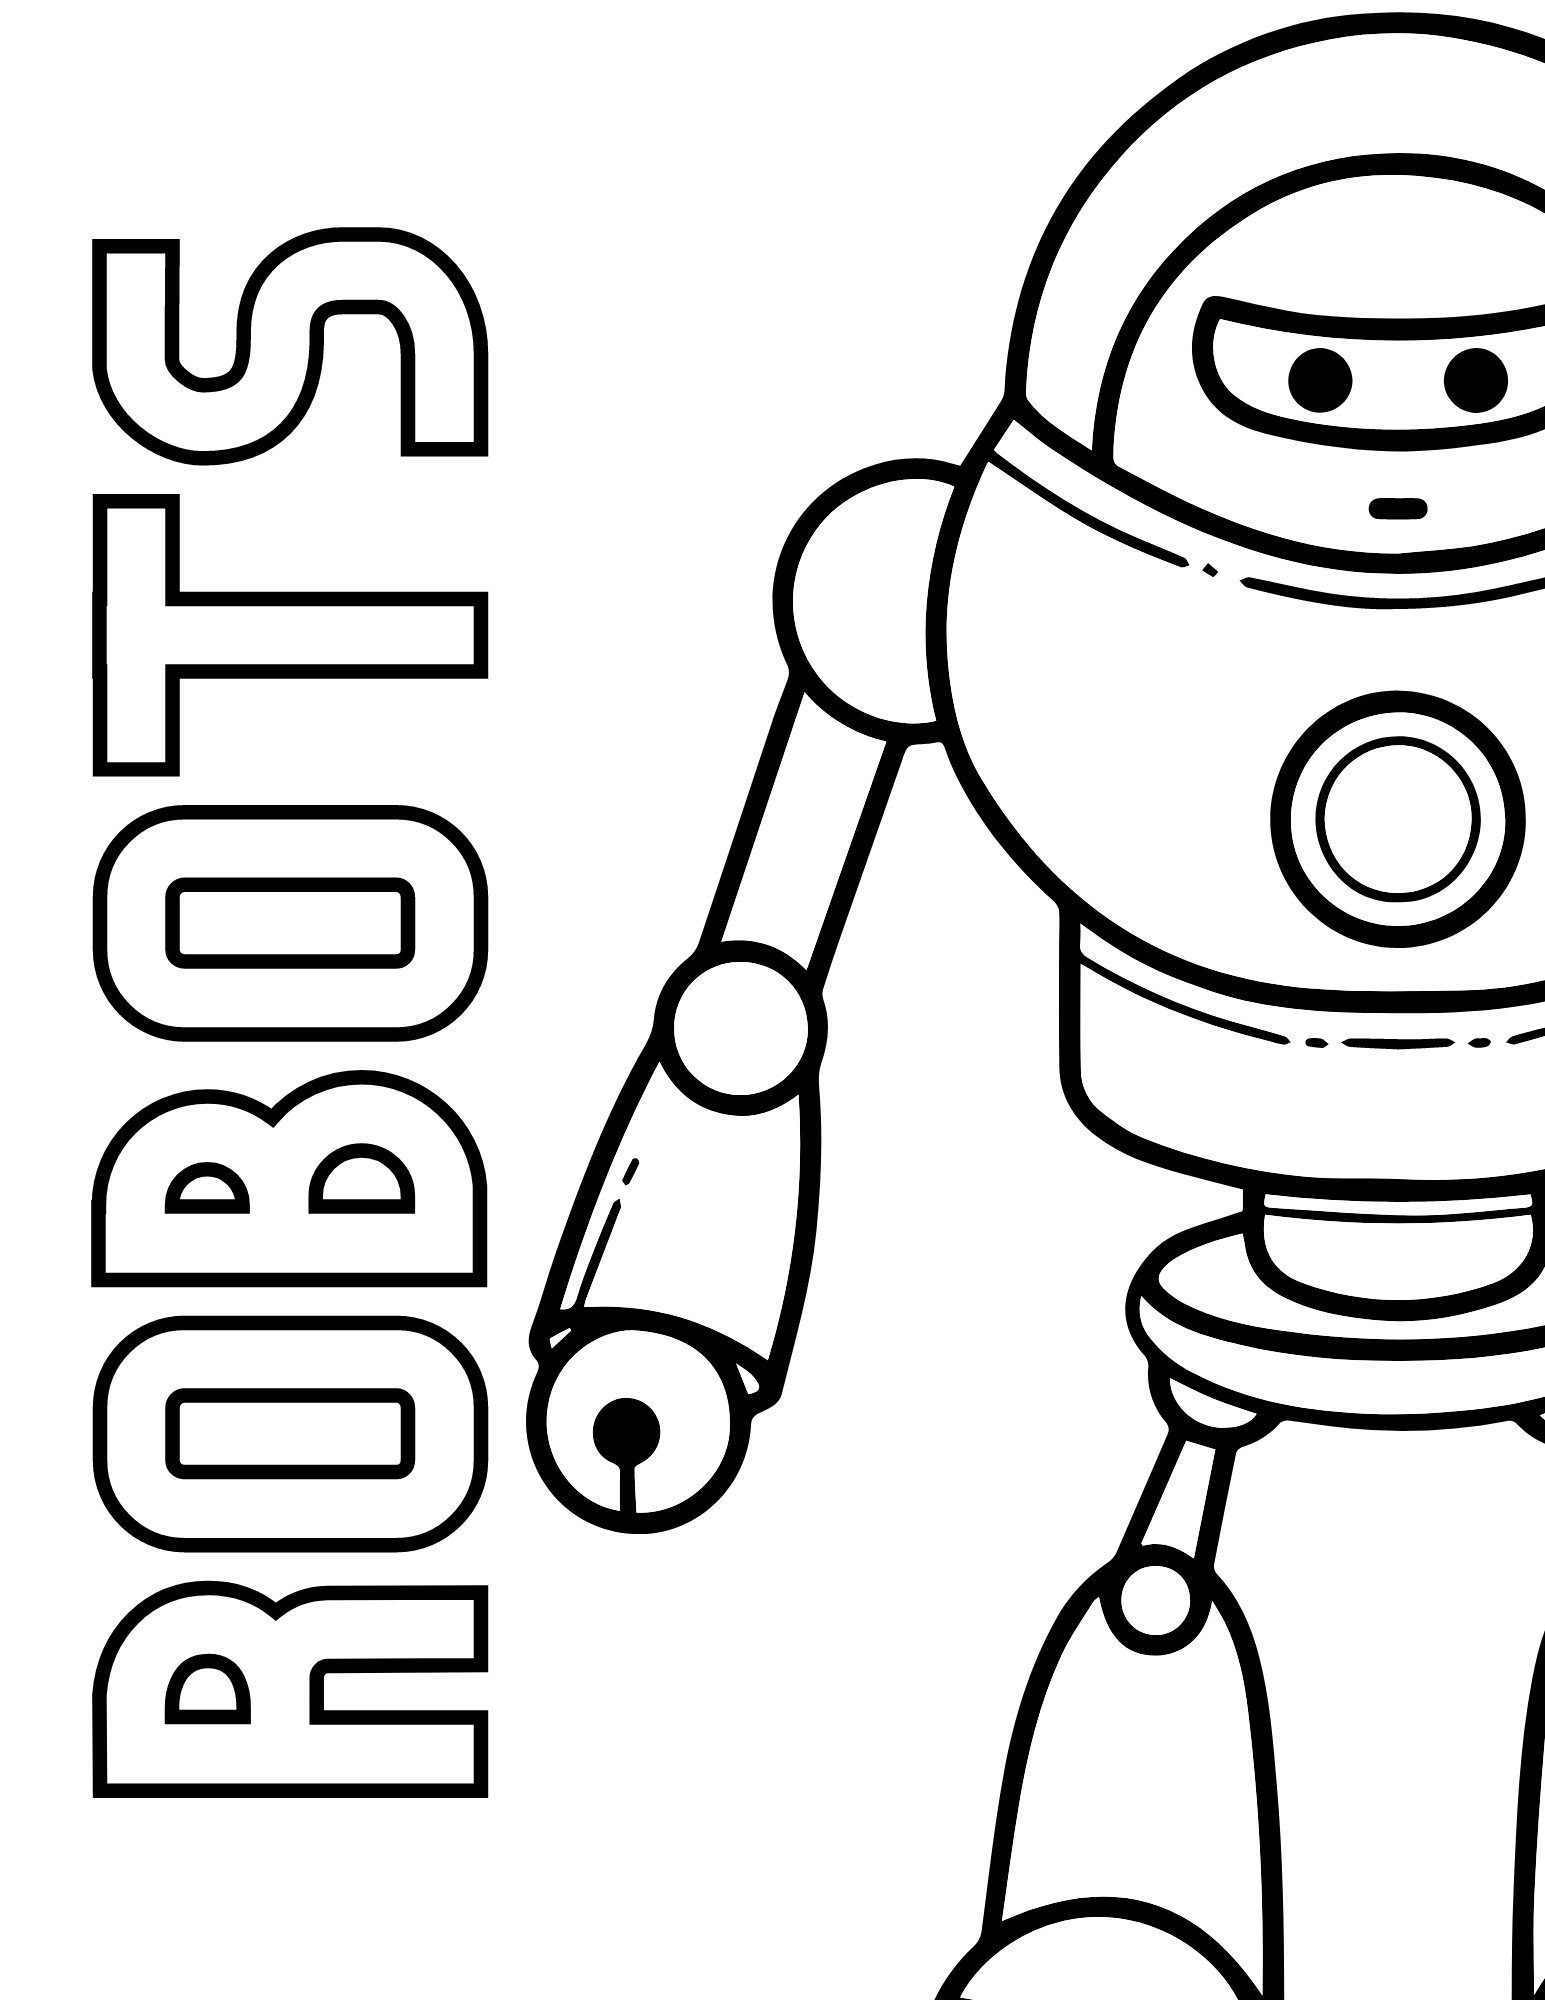 Free printable robot coloring pages for kids and adults